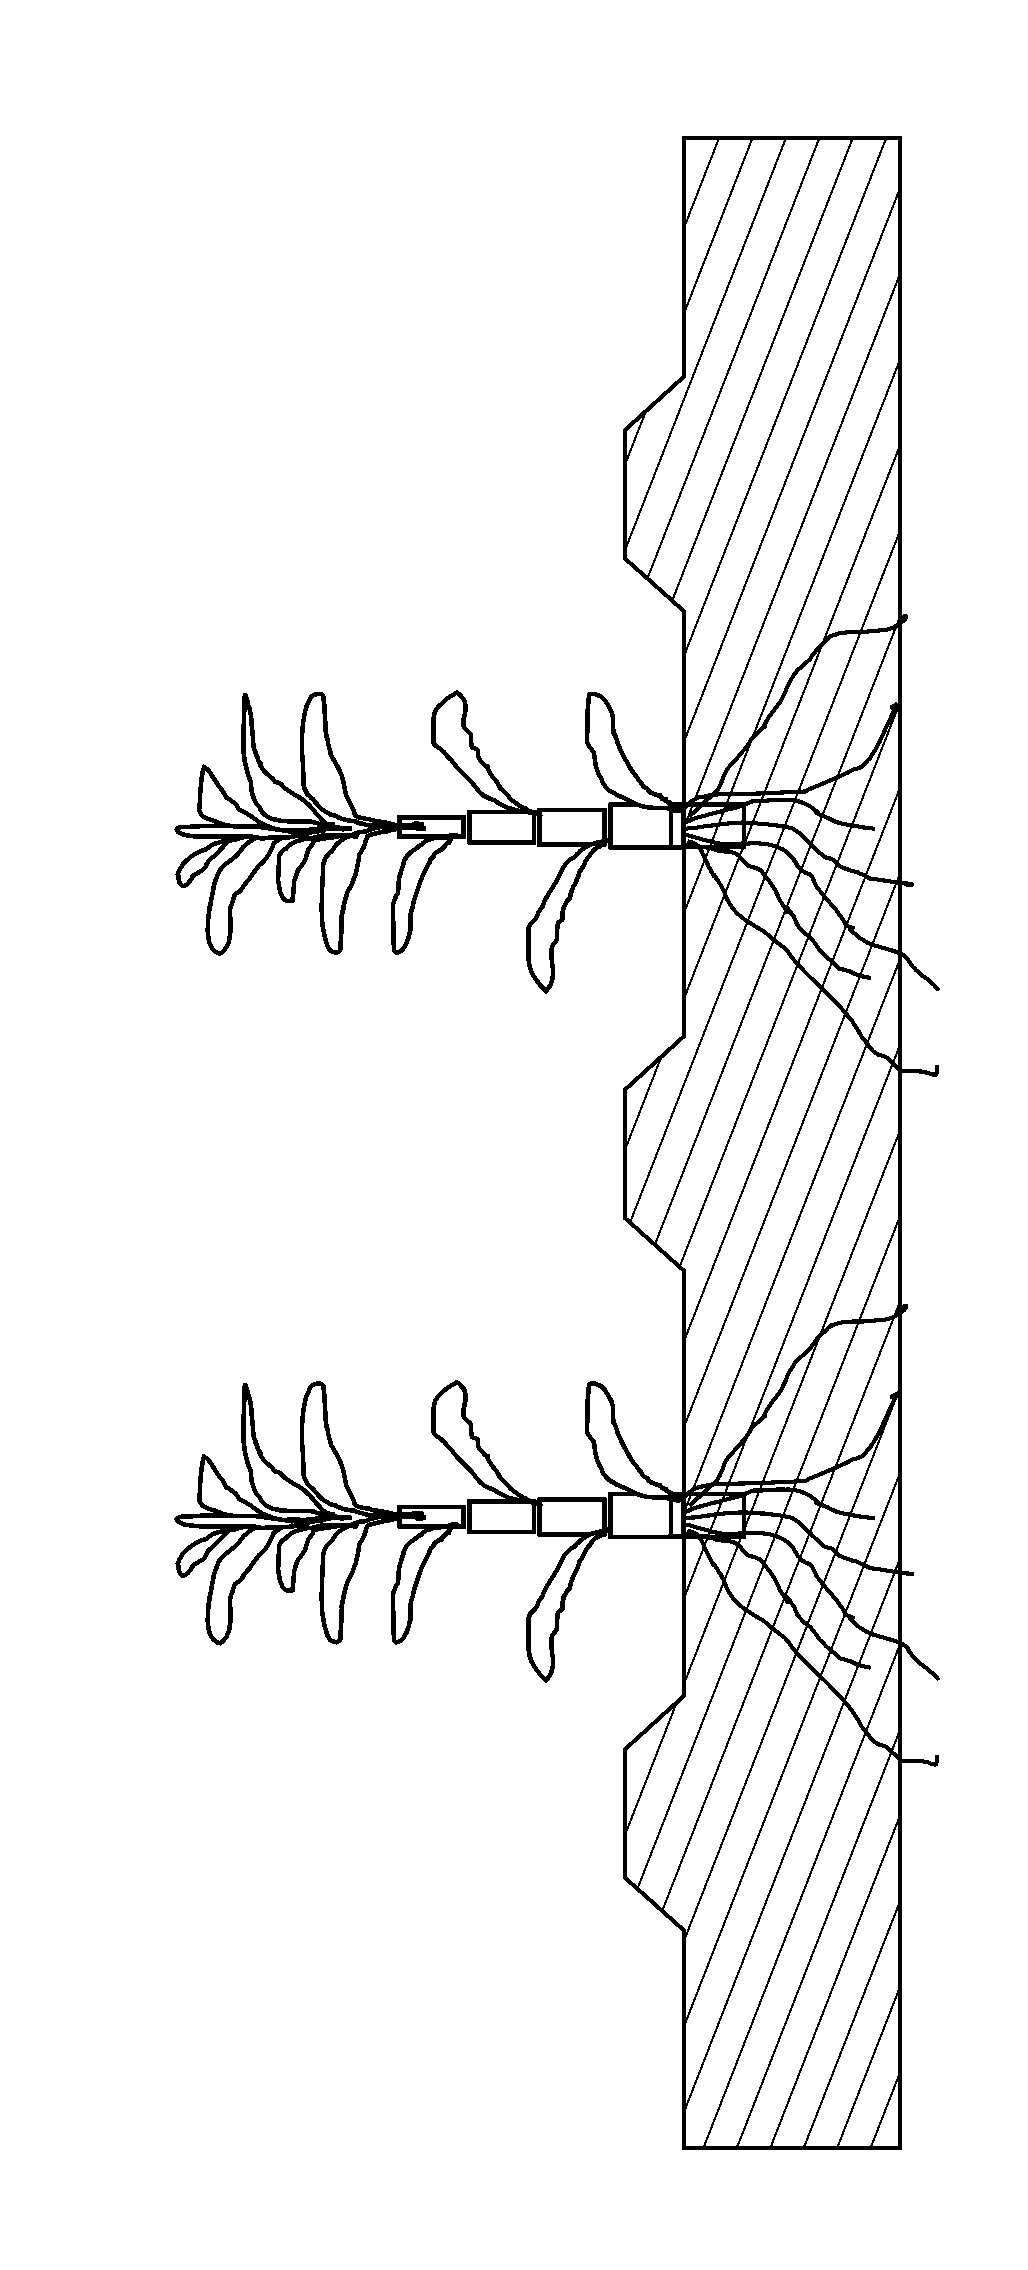 Method for soil heavy metal pollution remediation through grass family with enrichment capacity